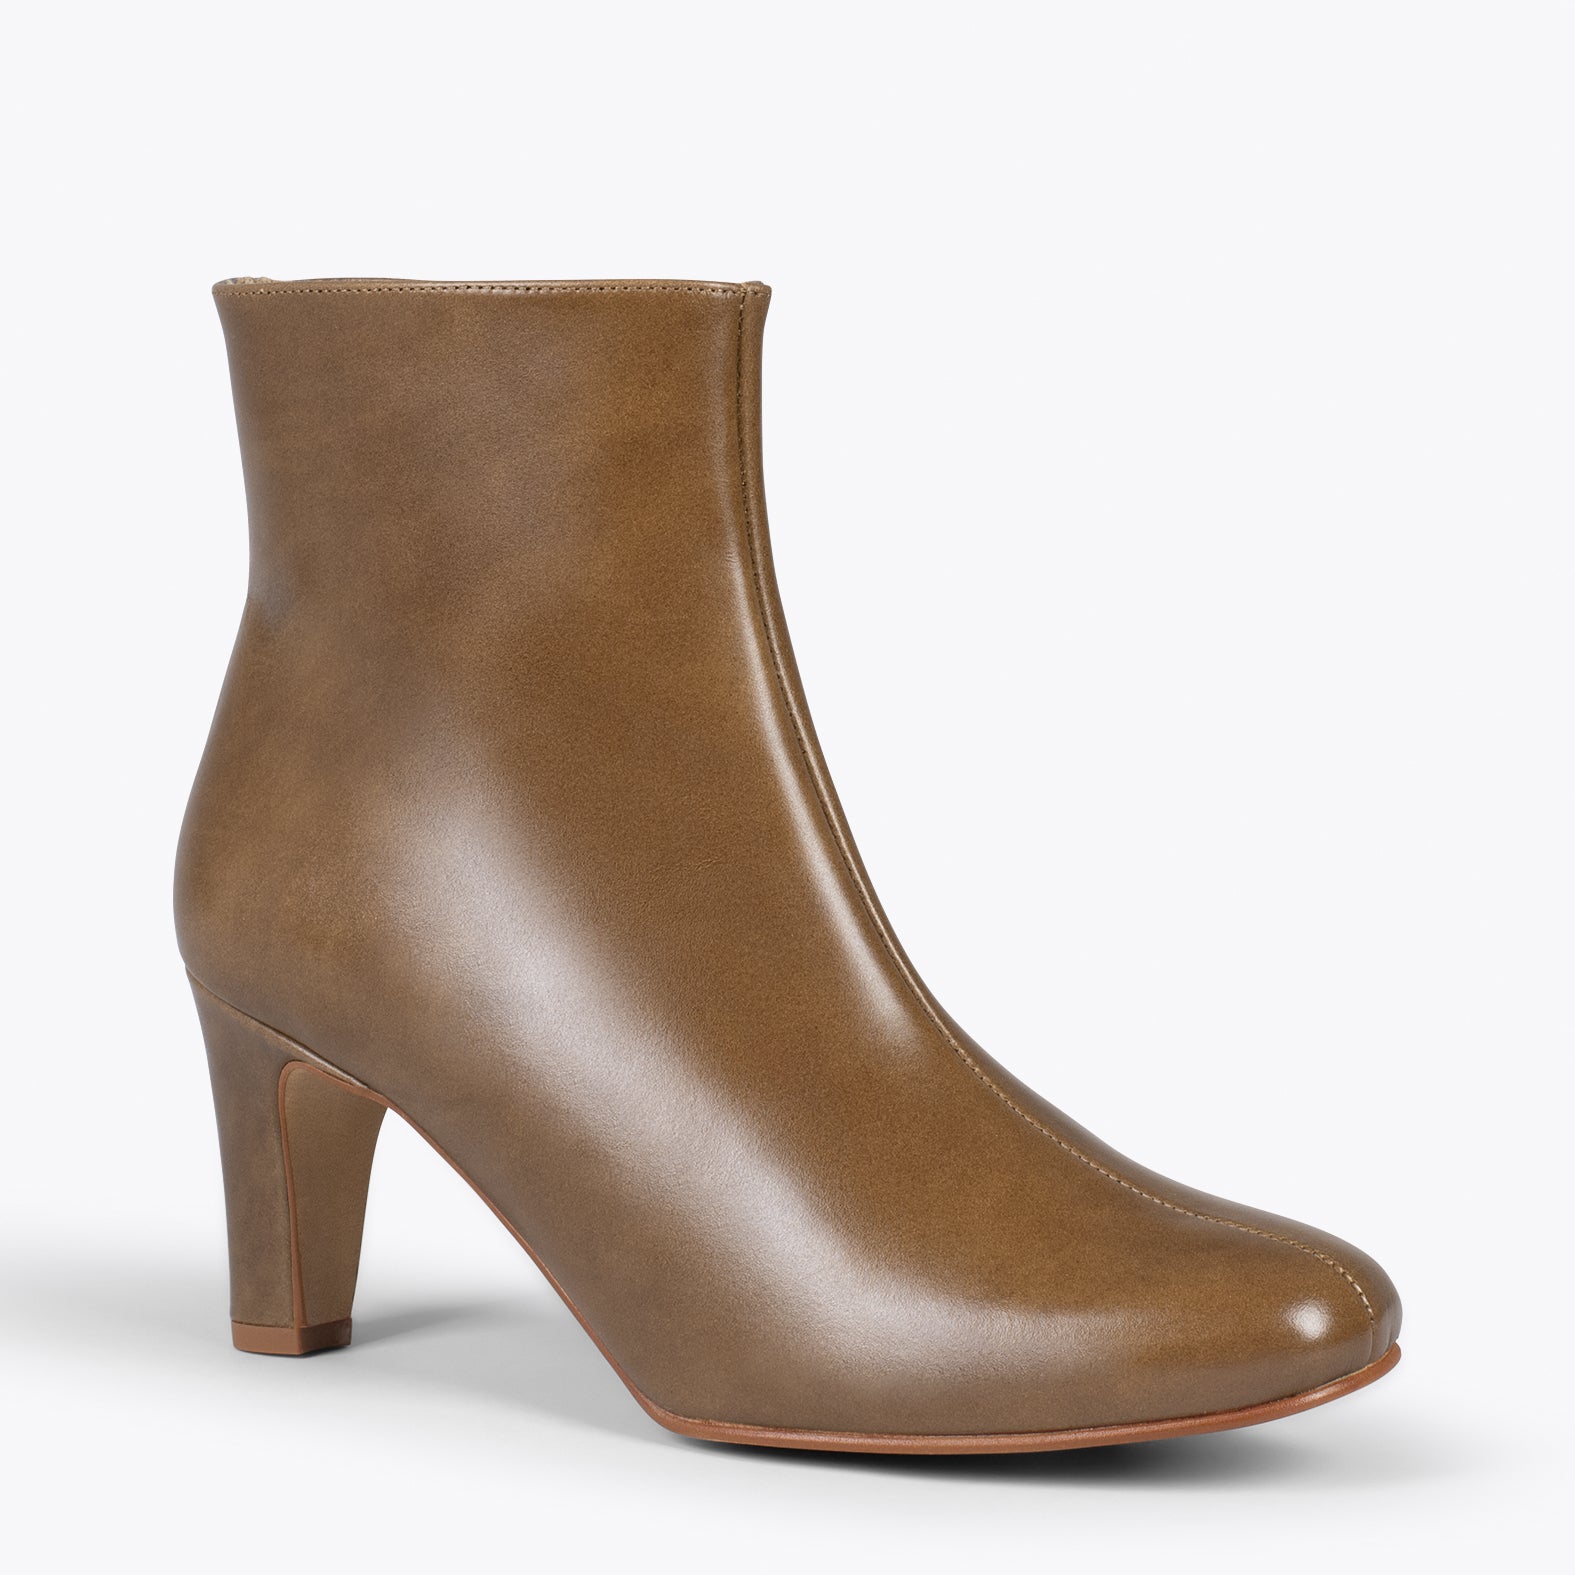 DAILY – TAUPE leather bootie